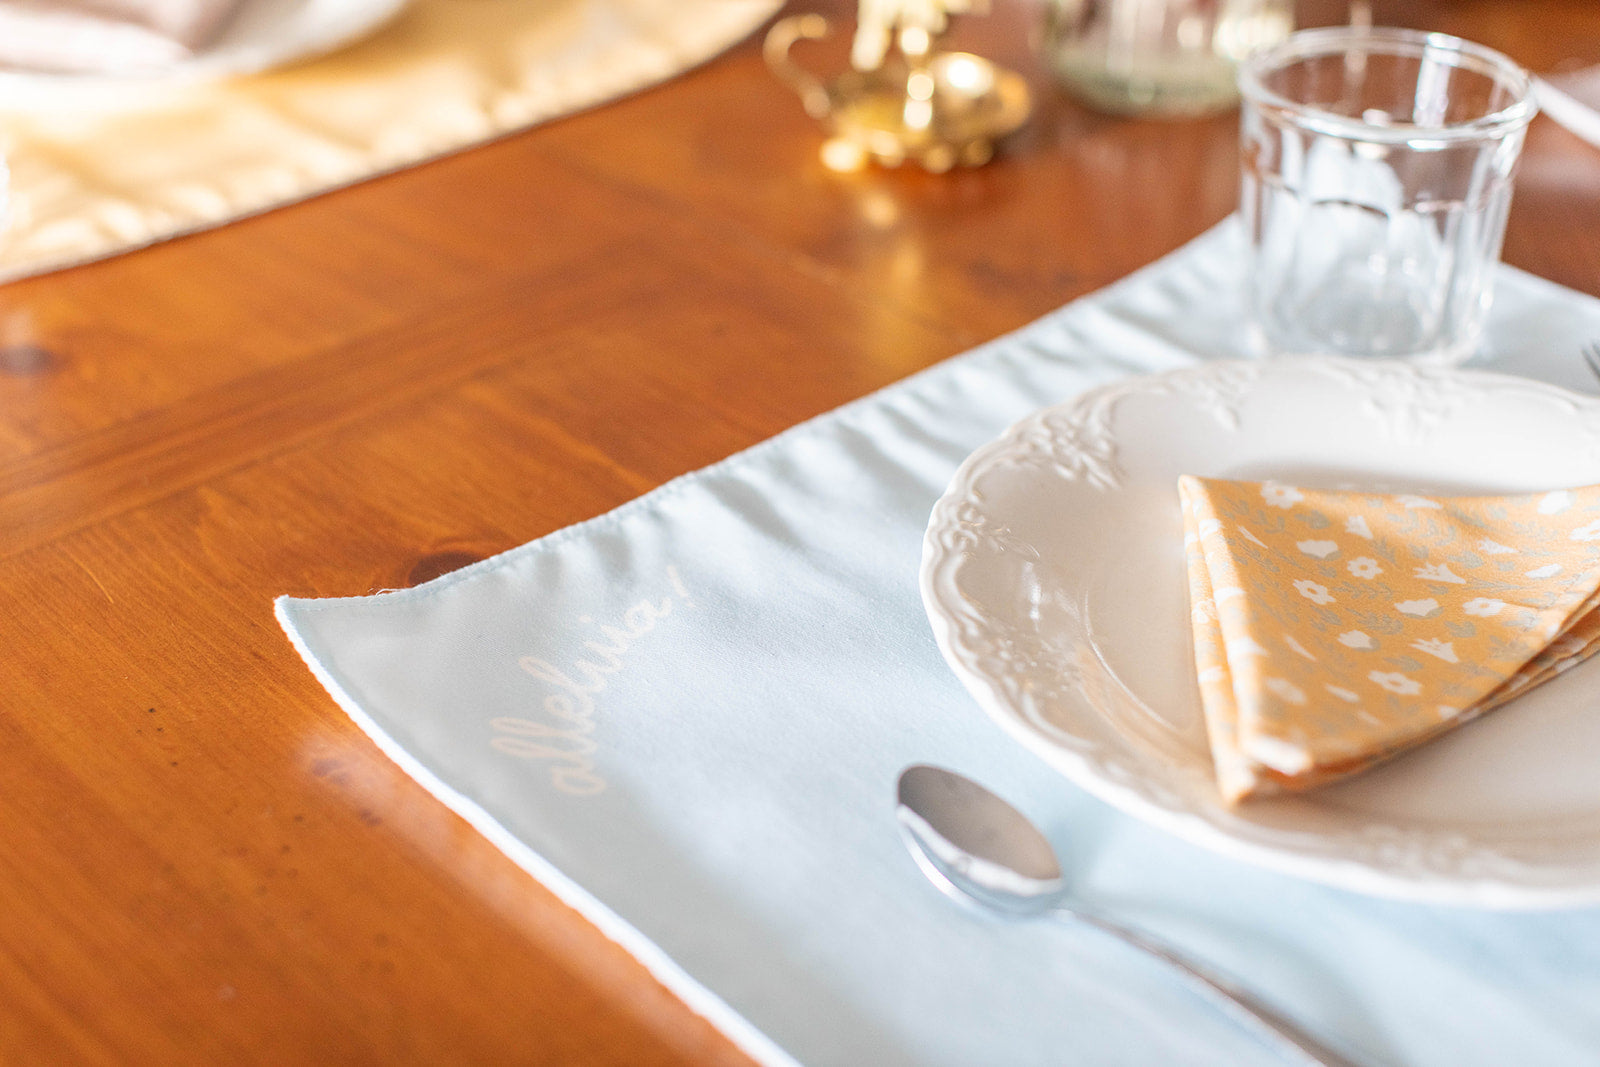 Easter Alleluia Placemat - Yellow